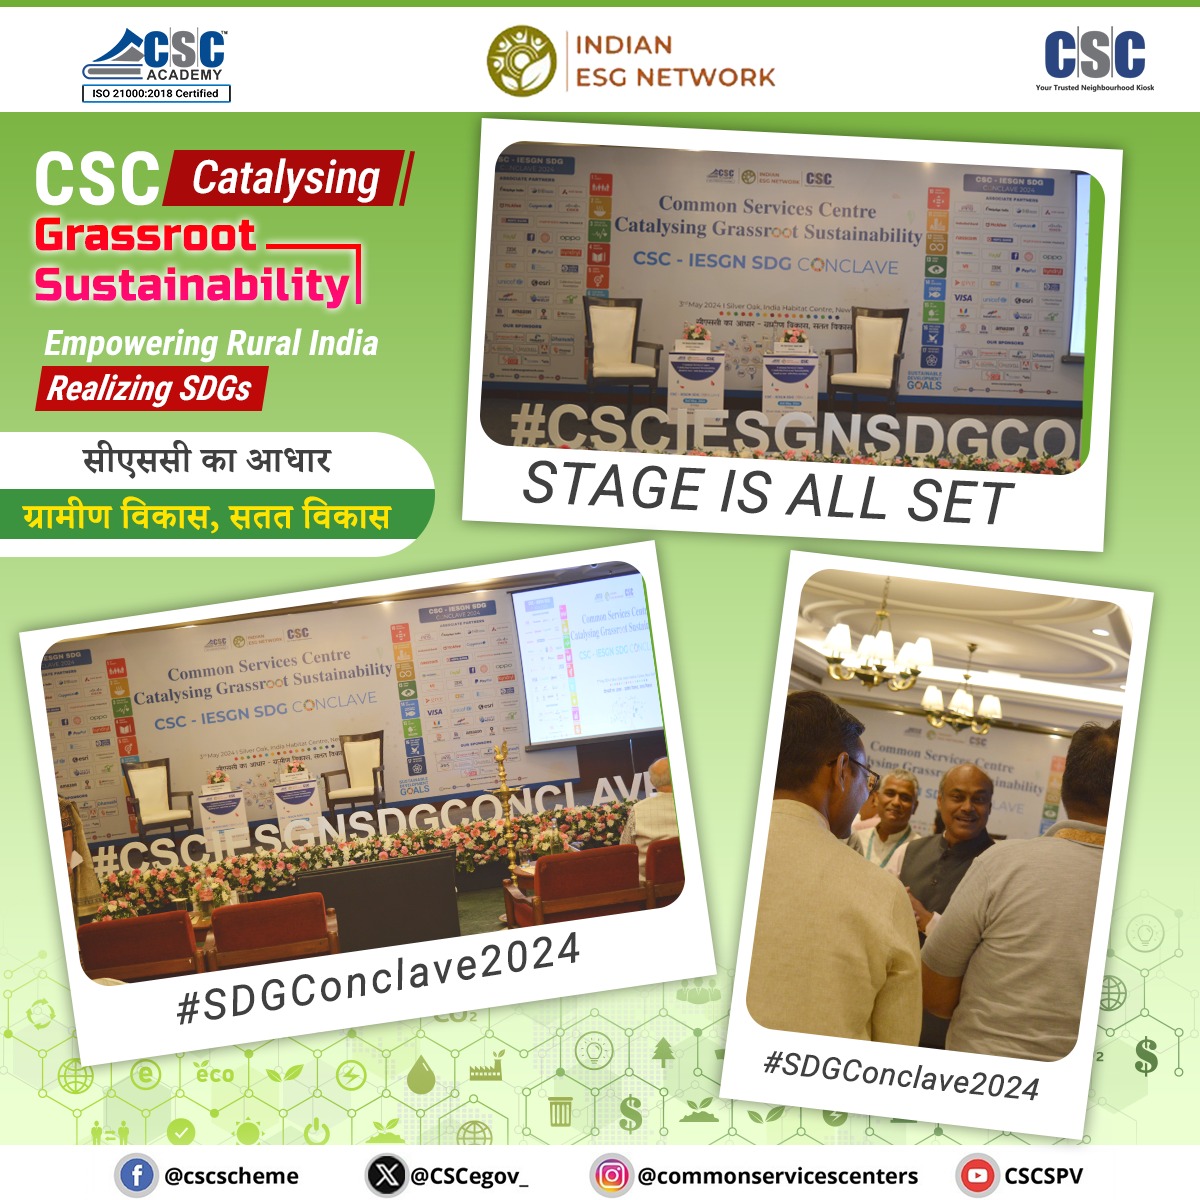 And so it begins!

We're here at 'CSC–IESGN SDG Conclave 2024'!
The stage stands poised to ignite brilliance with industry experts & leaders at #SDGConclave2024!

Stay Tuned & follow #CSC Social Media Channels for more updates...

#SustainableDevelopmentGoals #SustainableFuture